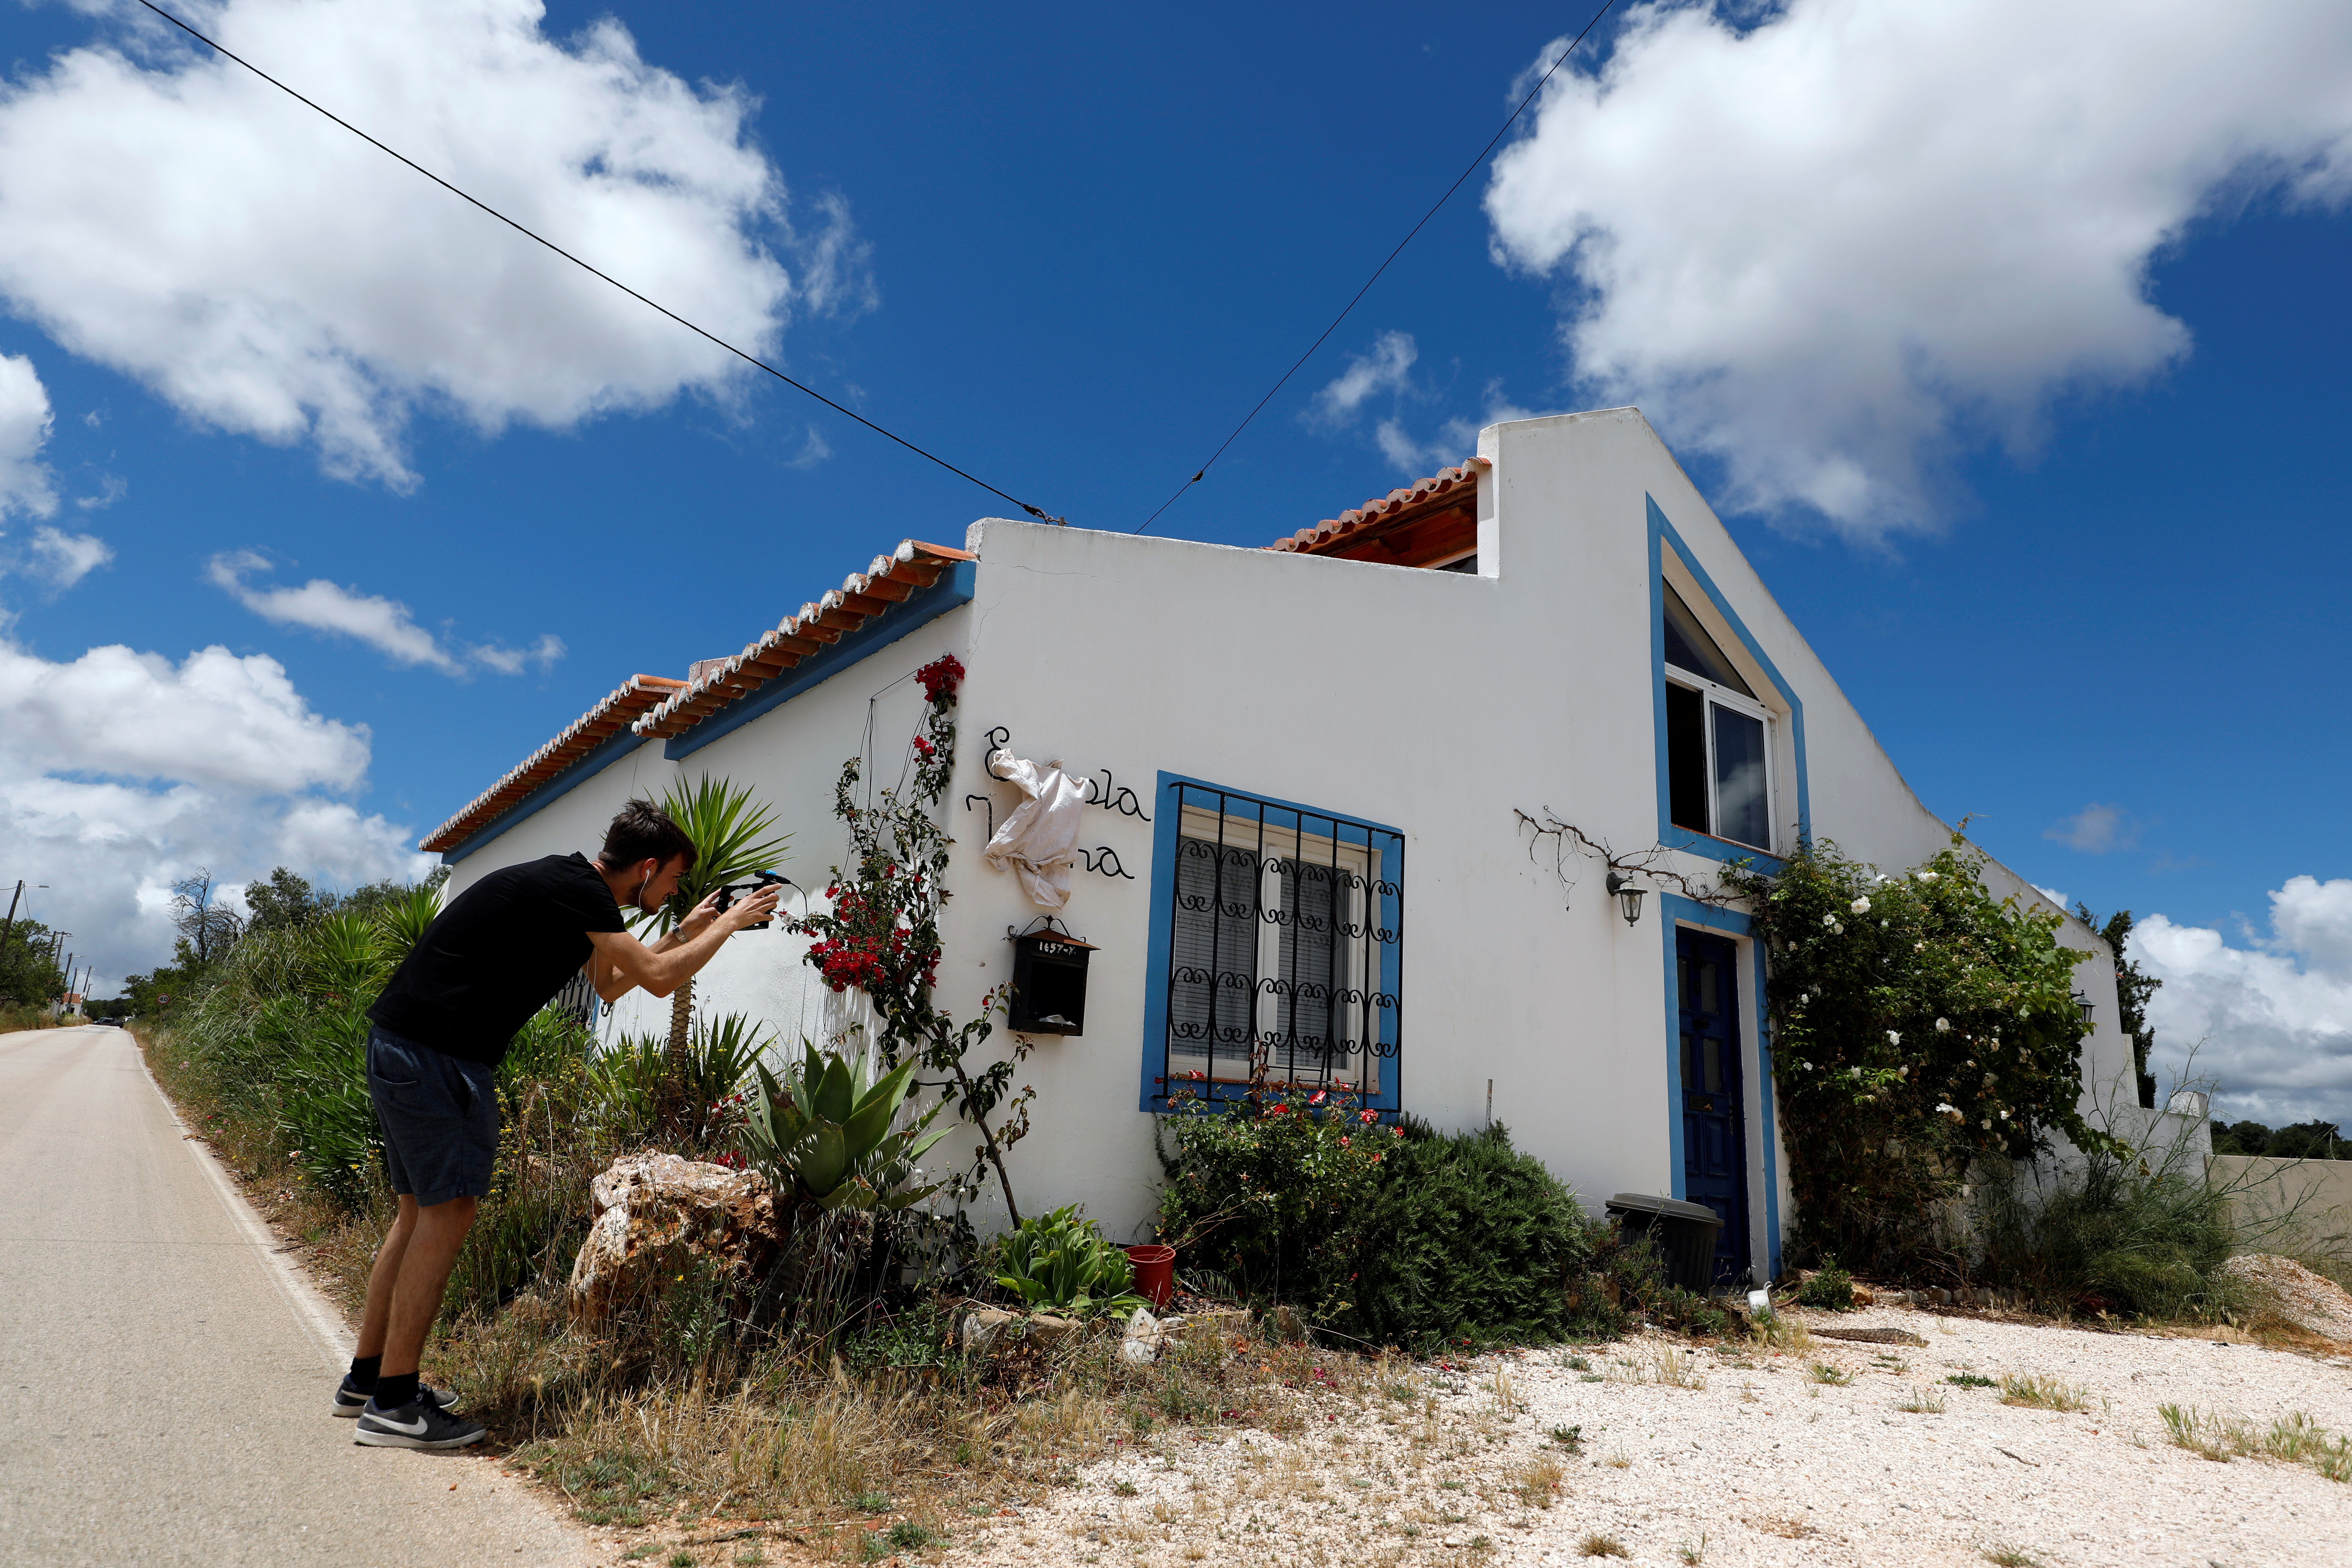 A reporter takes a picture of the house where the suspect lived when Madeleine McCann disappeared in 2007, near Lagos